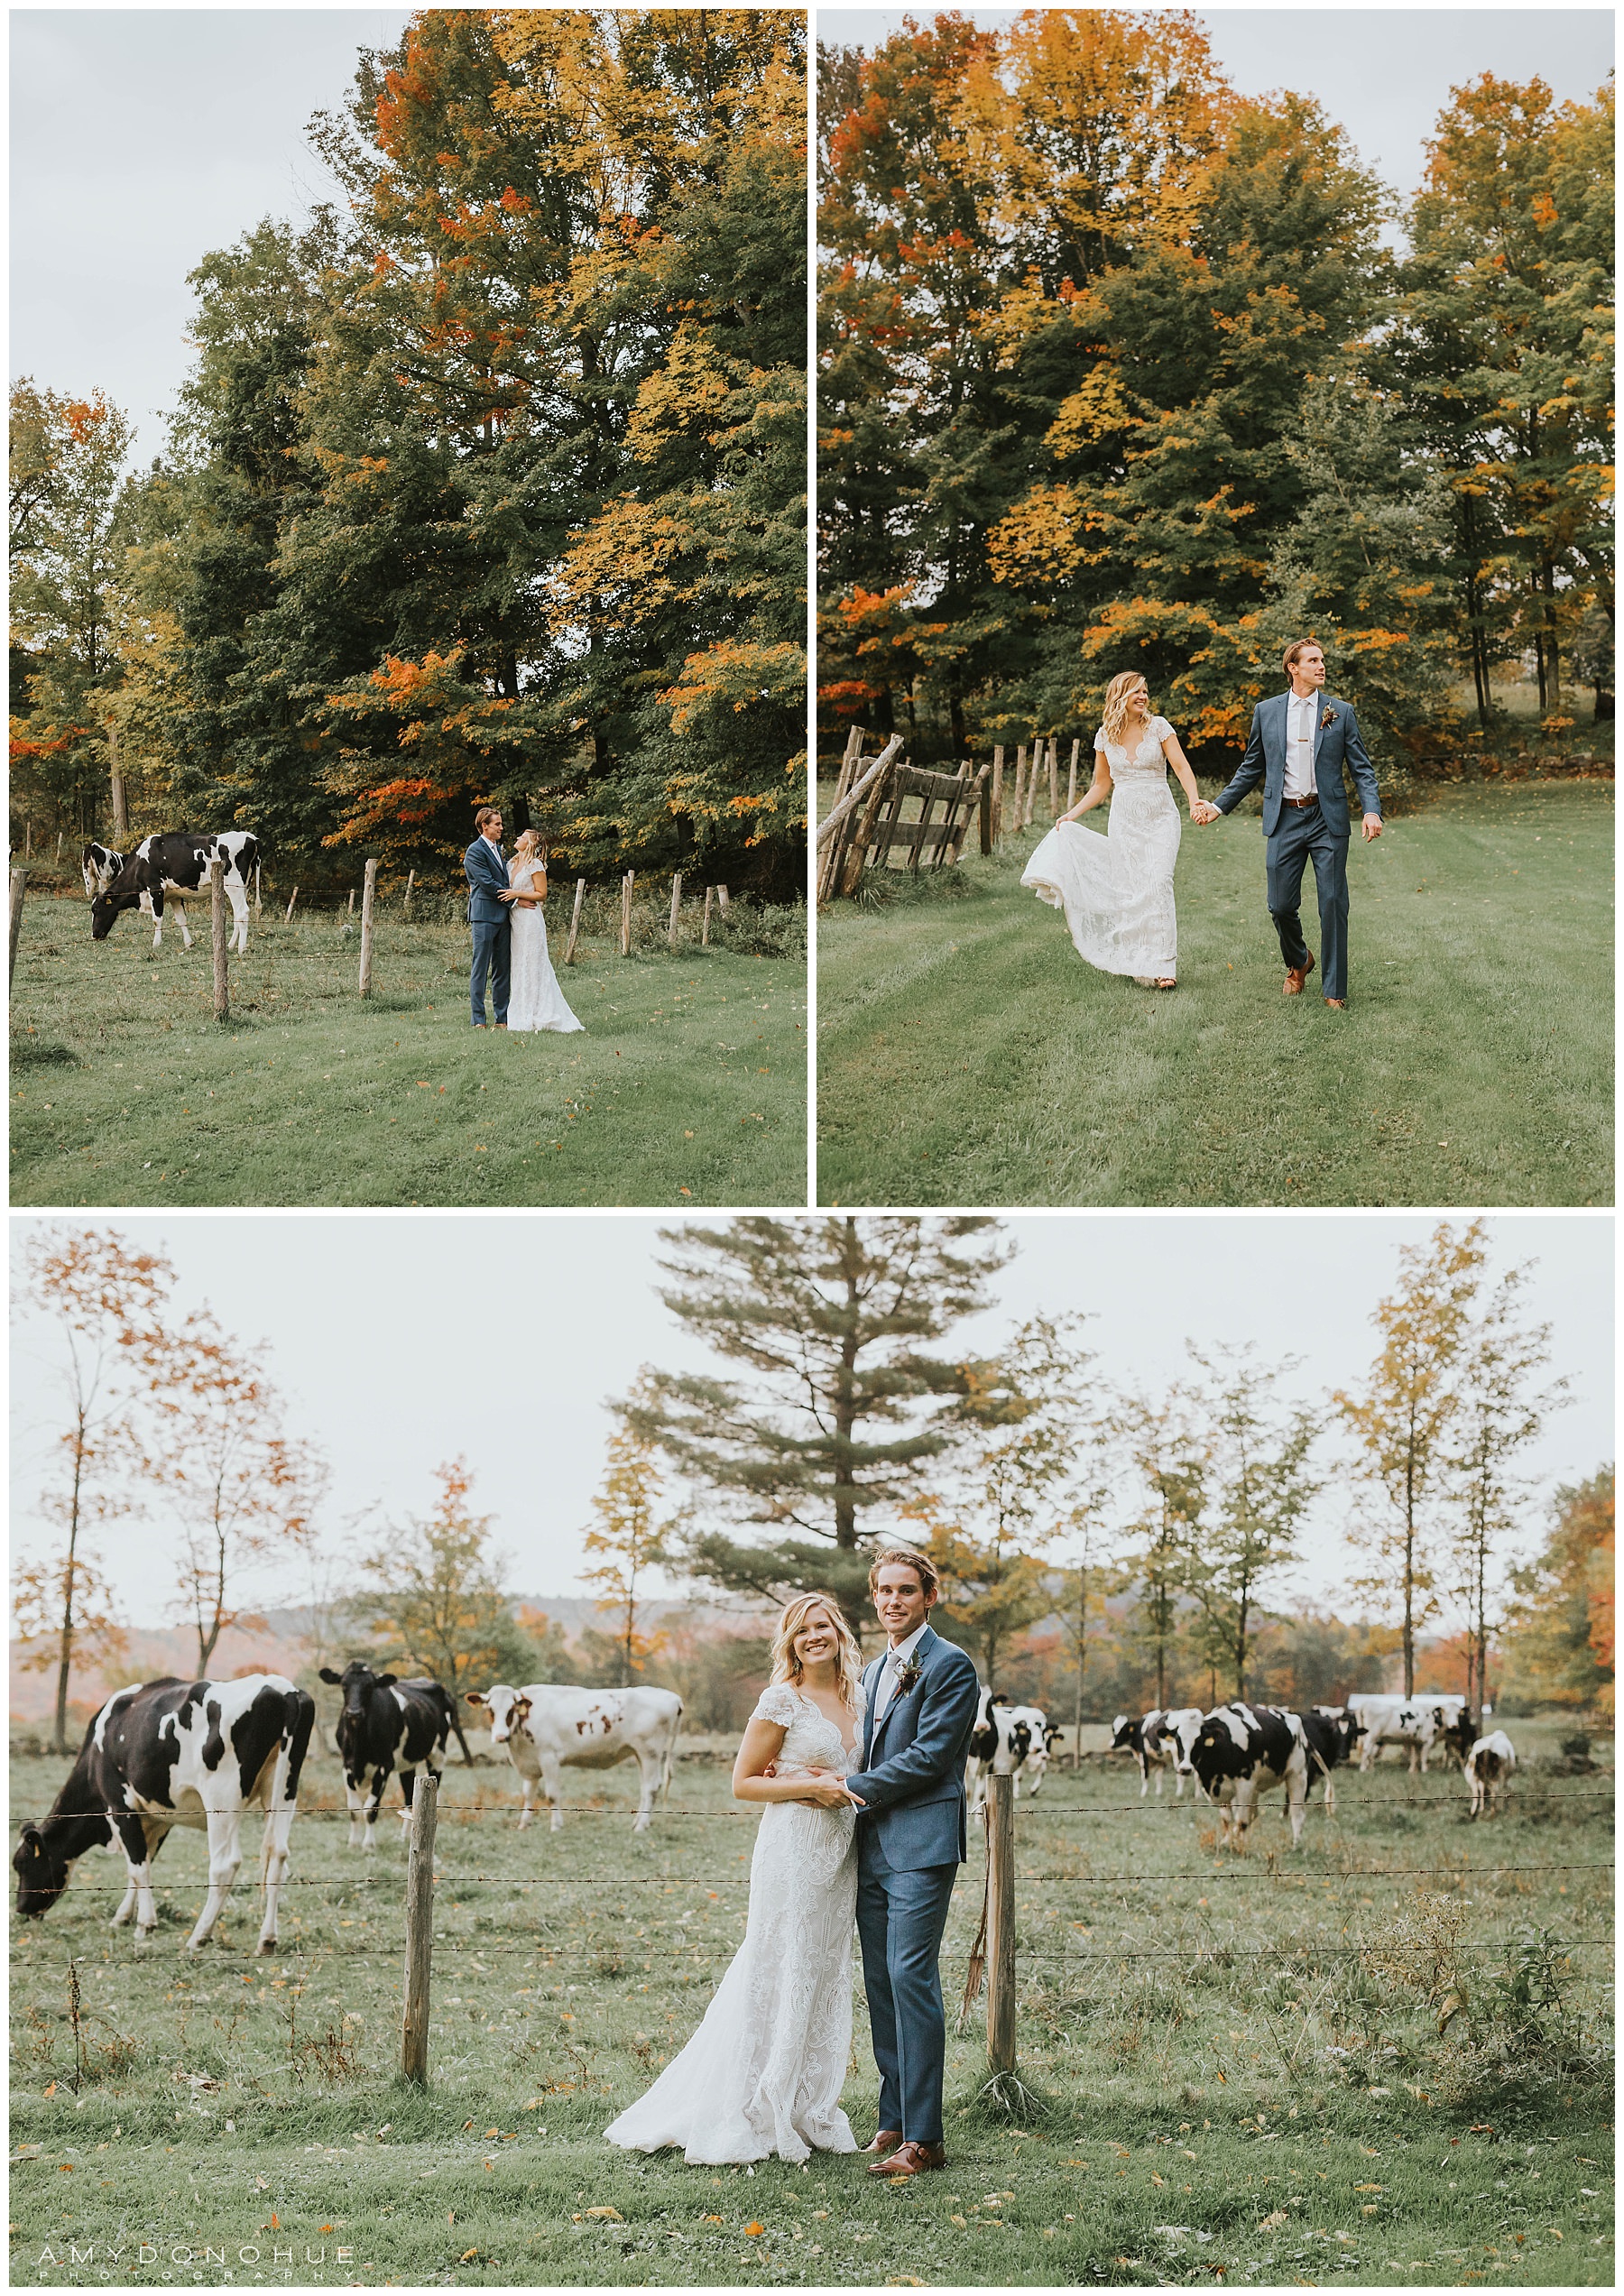 Just Married Portraits | The Inn at Round Barn Farm | © Amy Donohue Photography